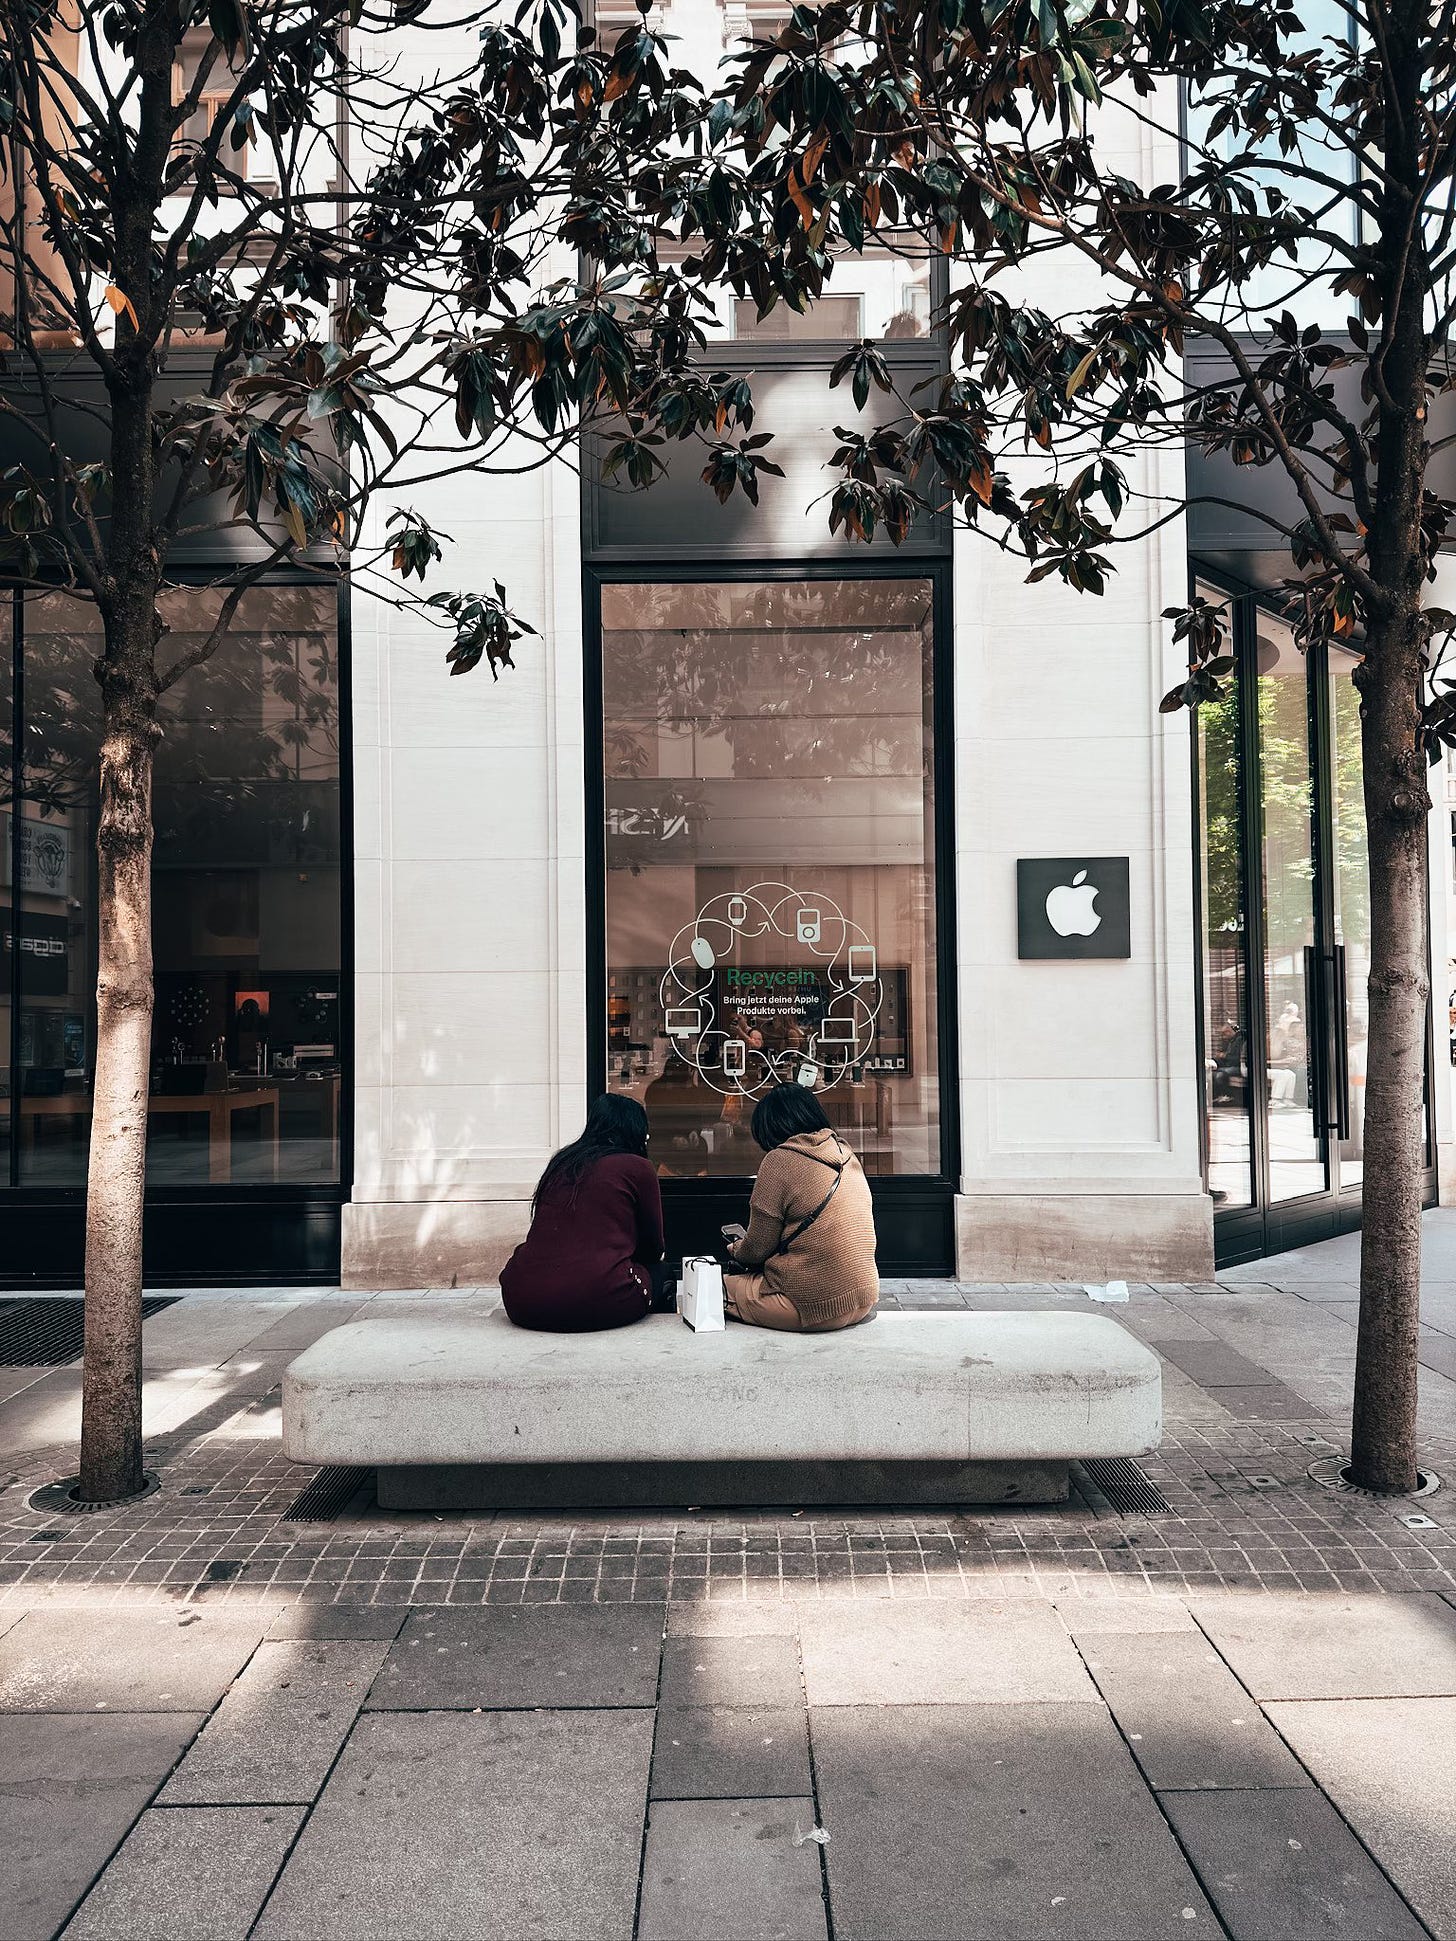 Two people sit on a stone bench outside the Apple Store in Vienna. On the window is an Earth Day recycling decal.